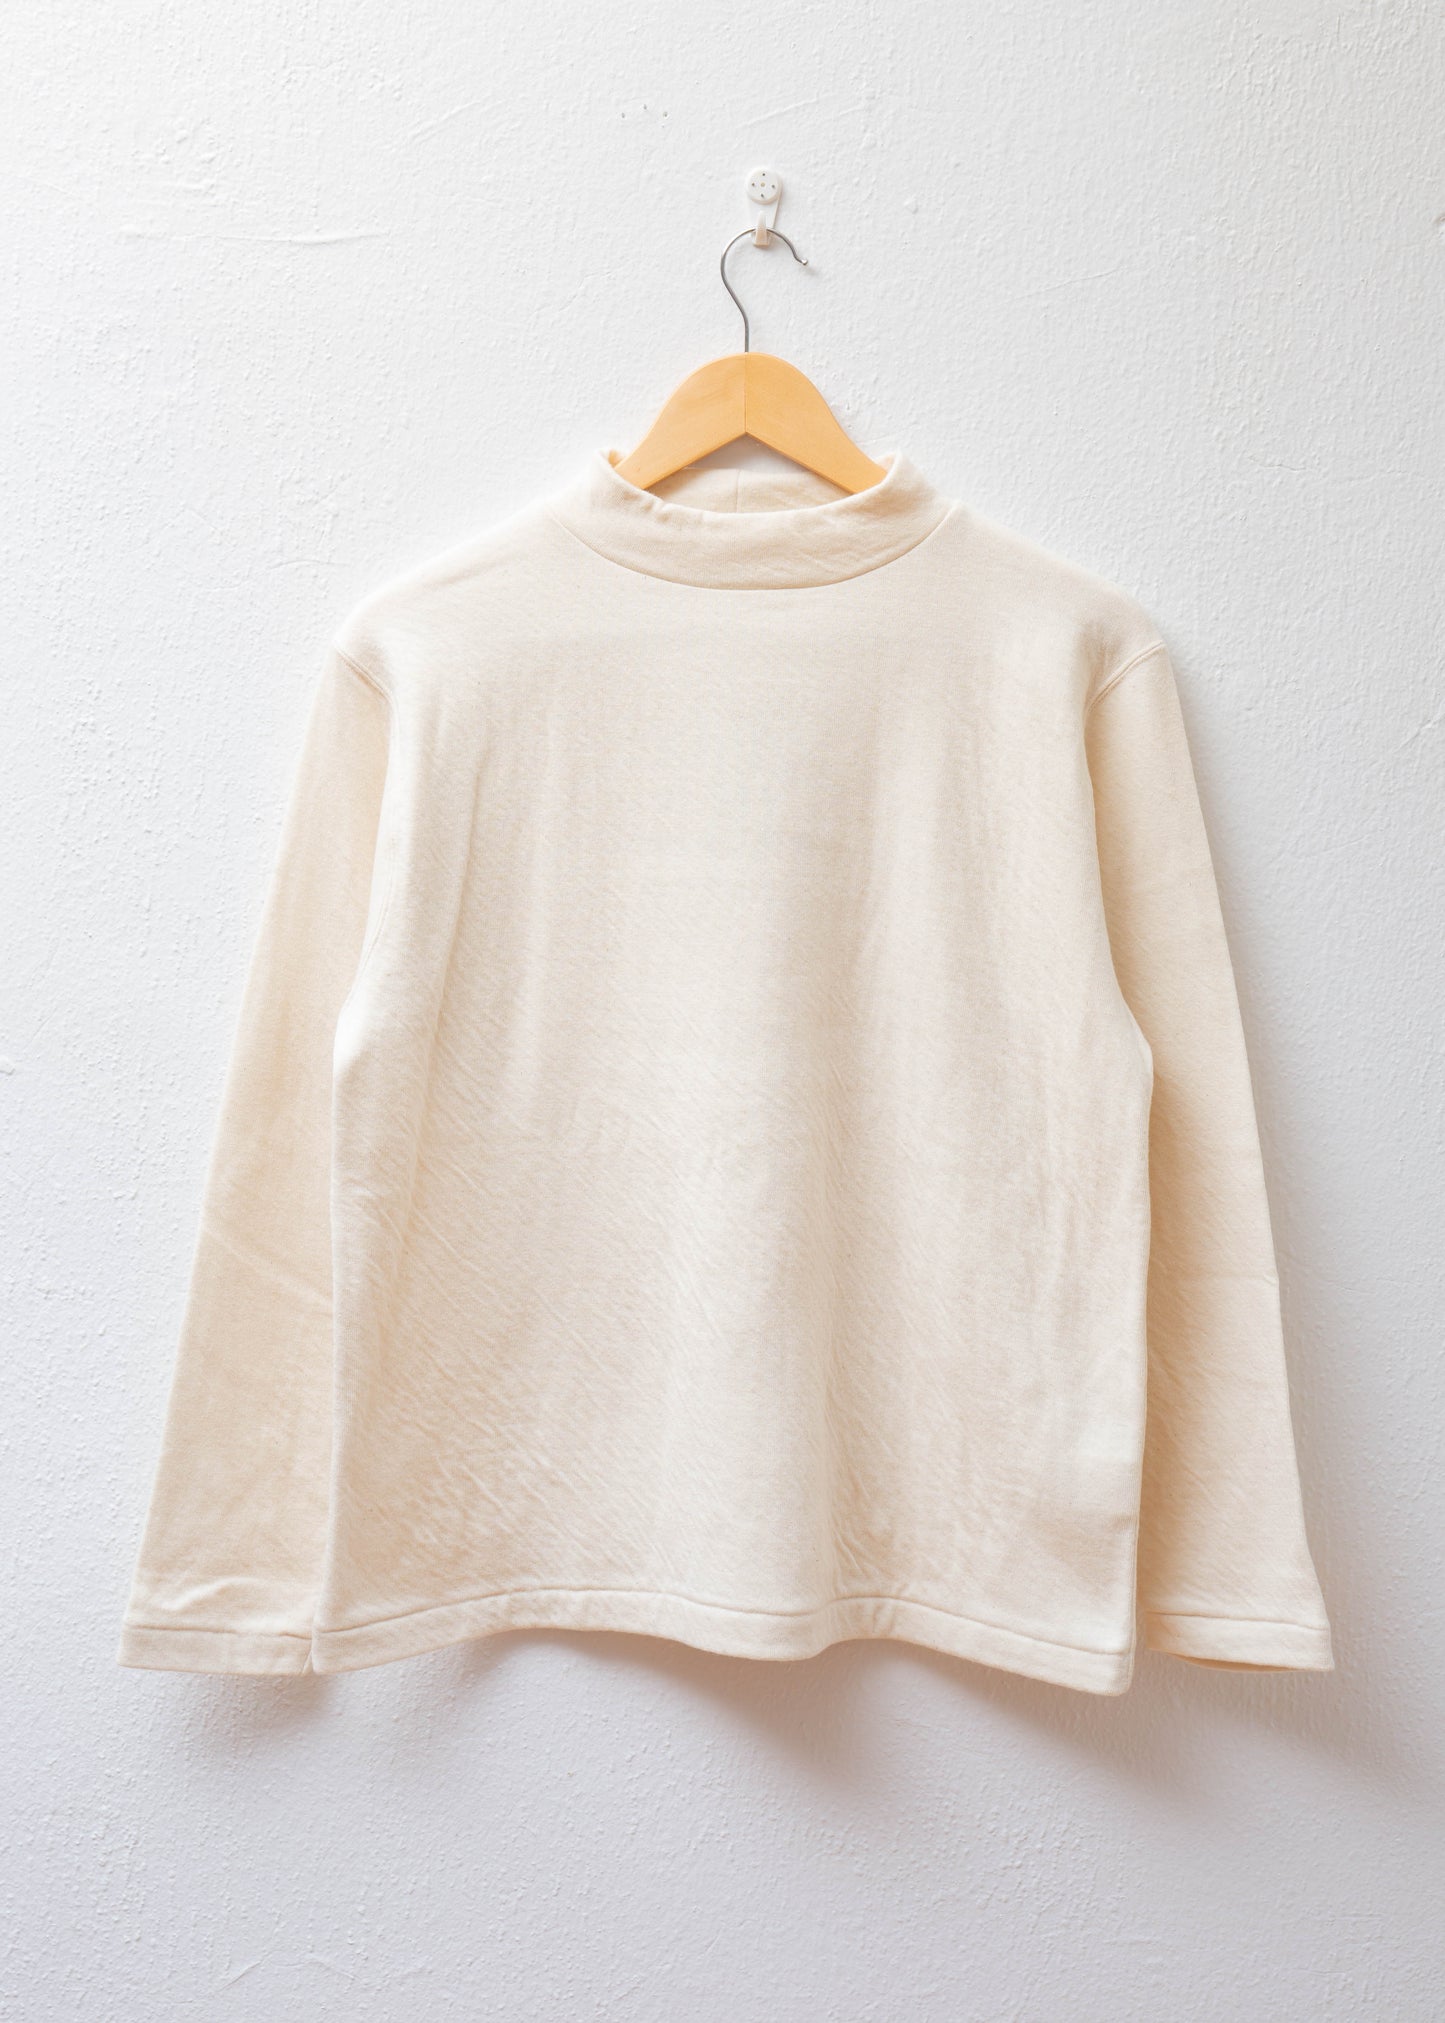 Mock Neck Pullover in color natural hanging on white wall